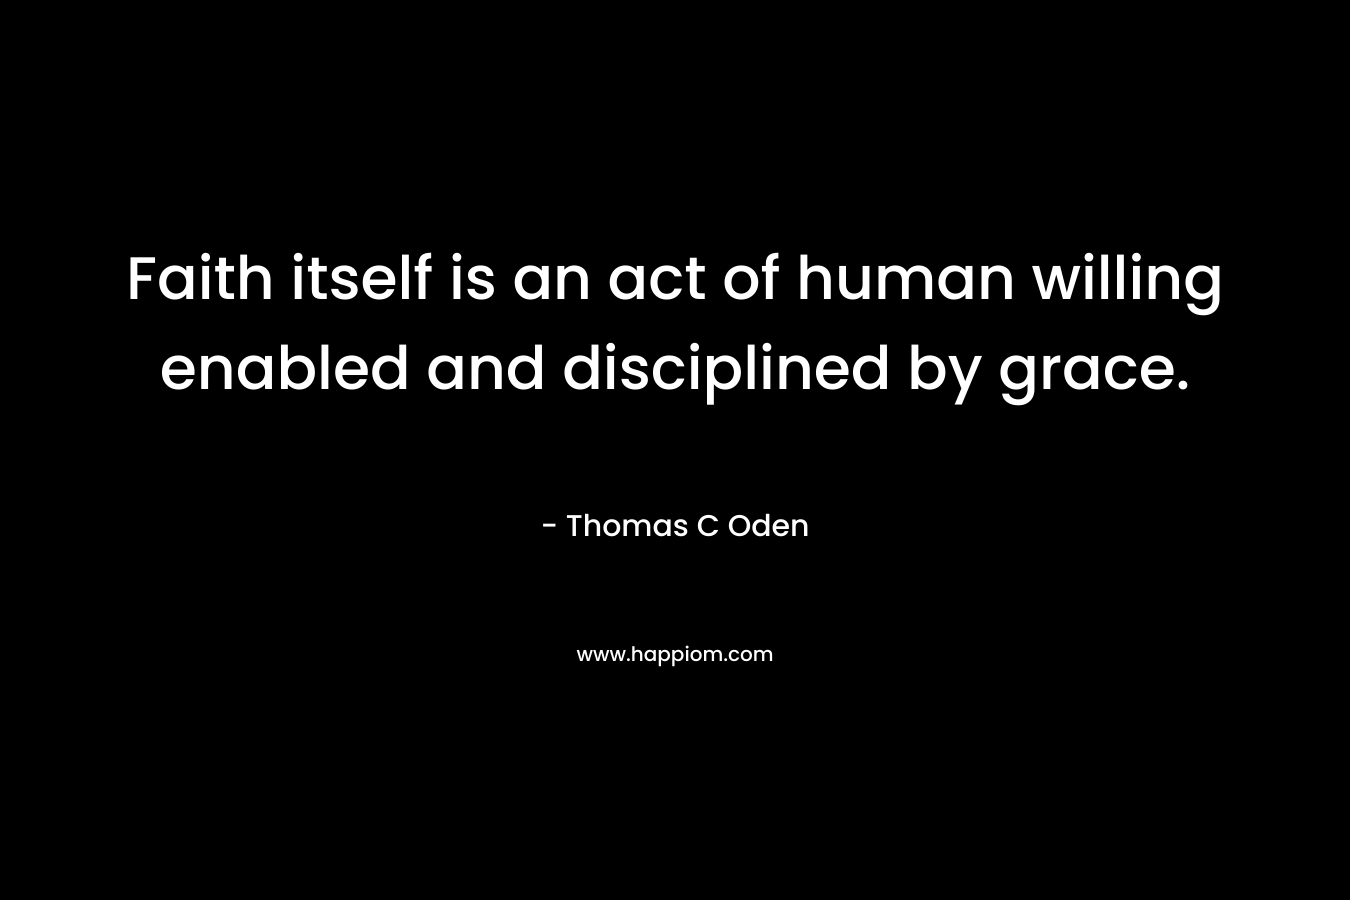 Faith itself is an act of human willing enabled and disciplined by grace. – Thomas C Oden